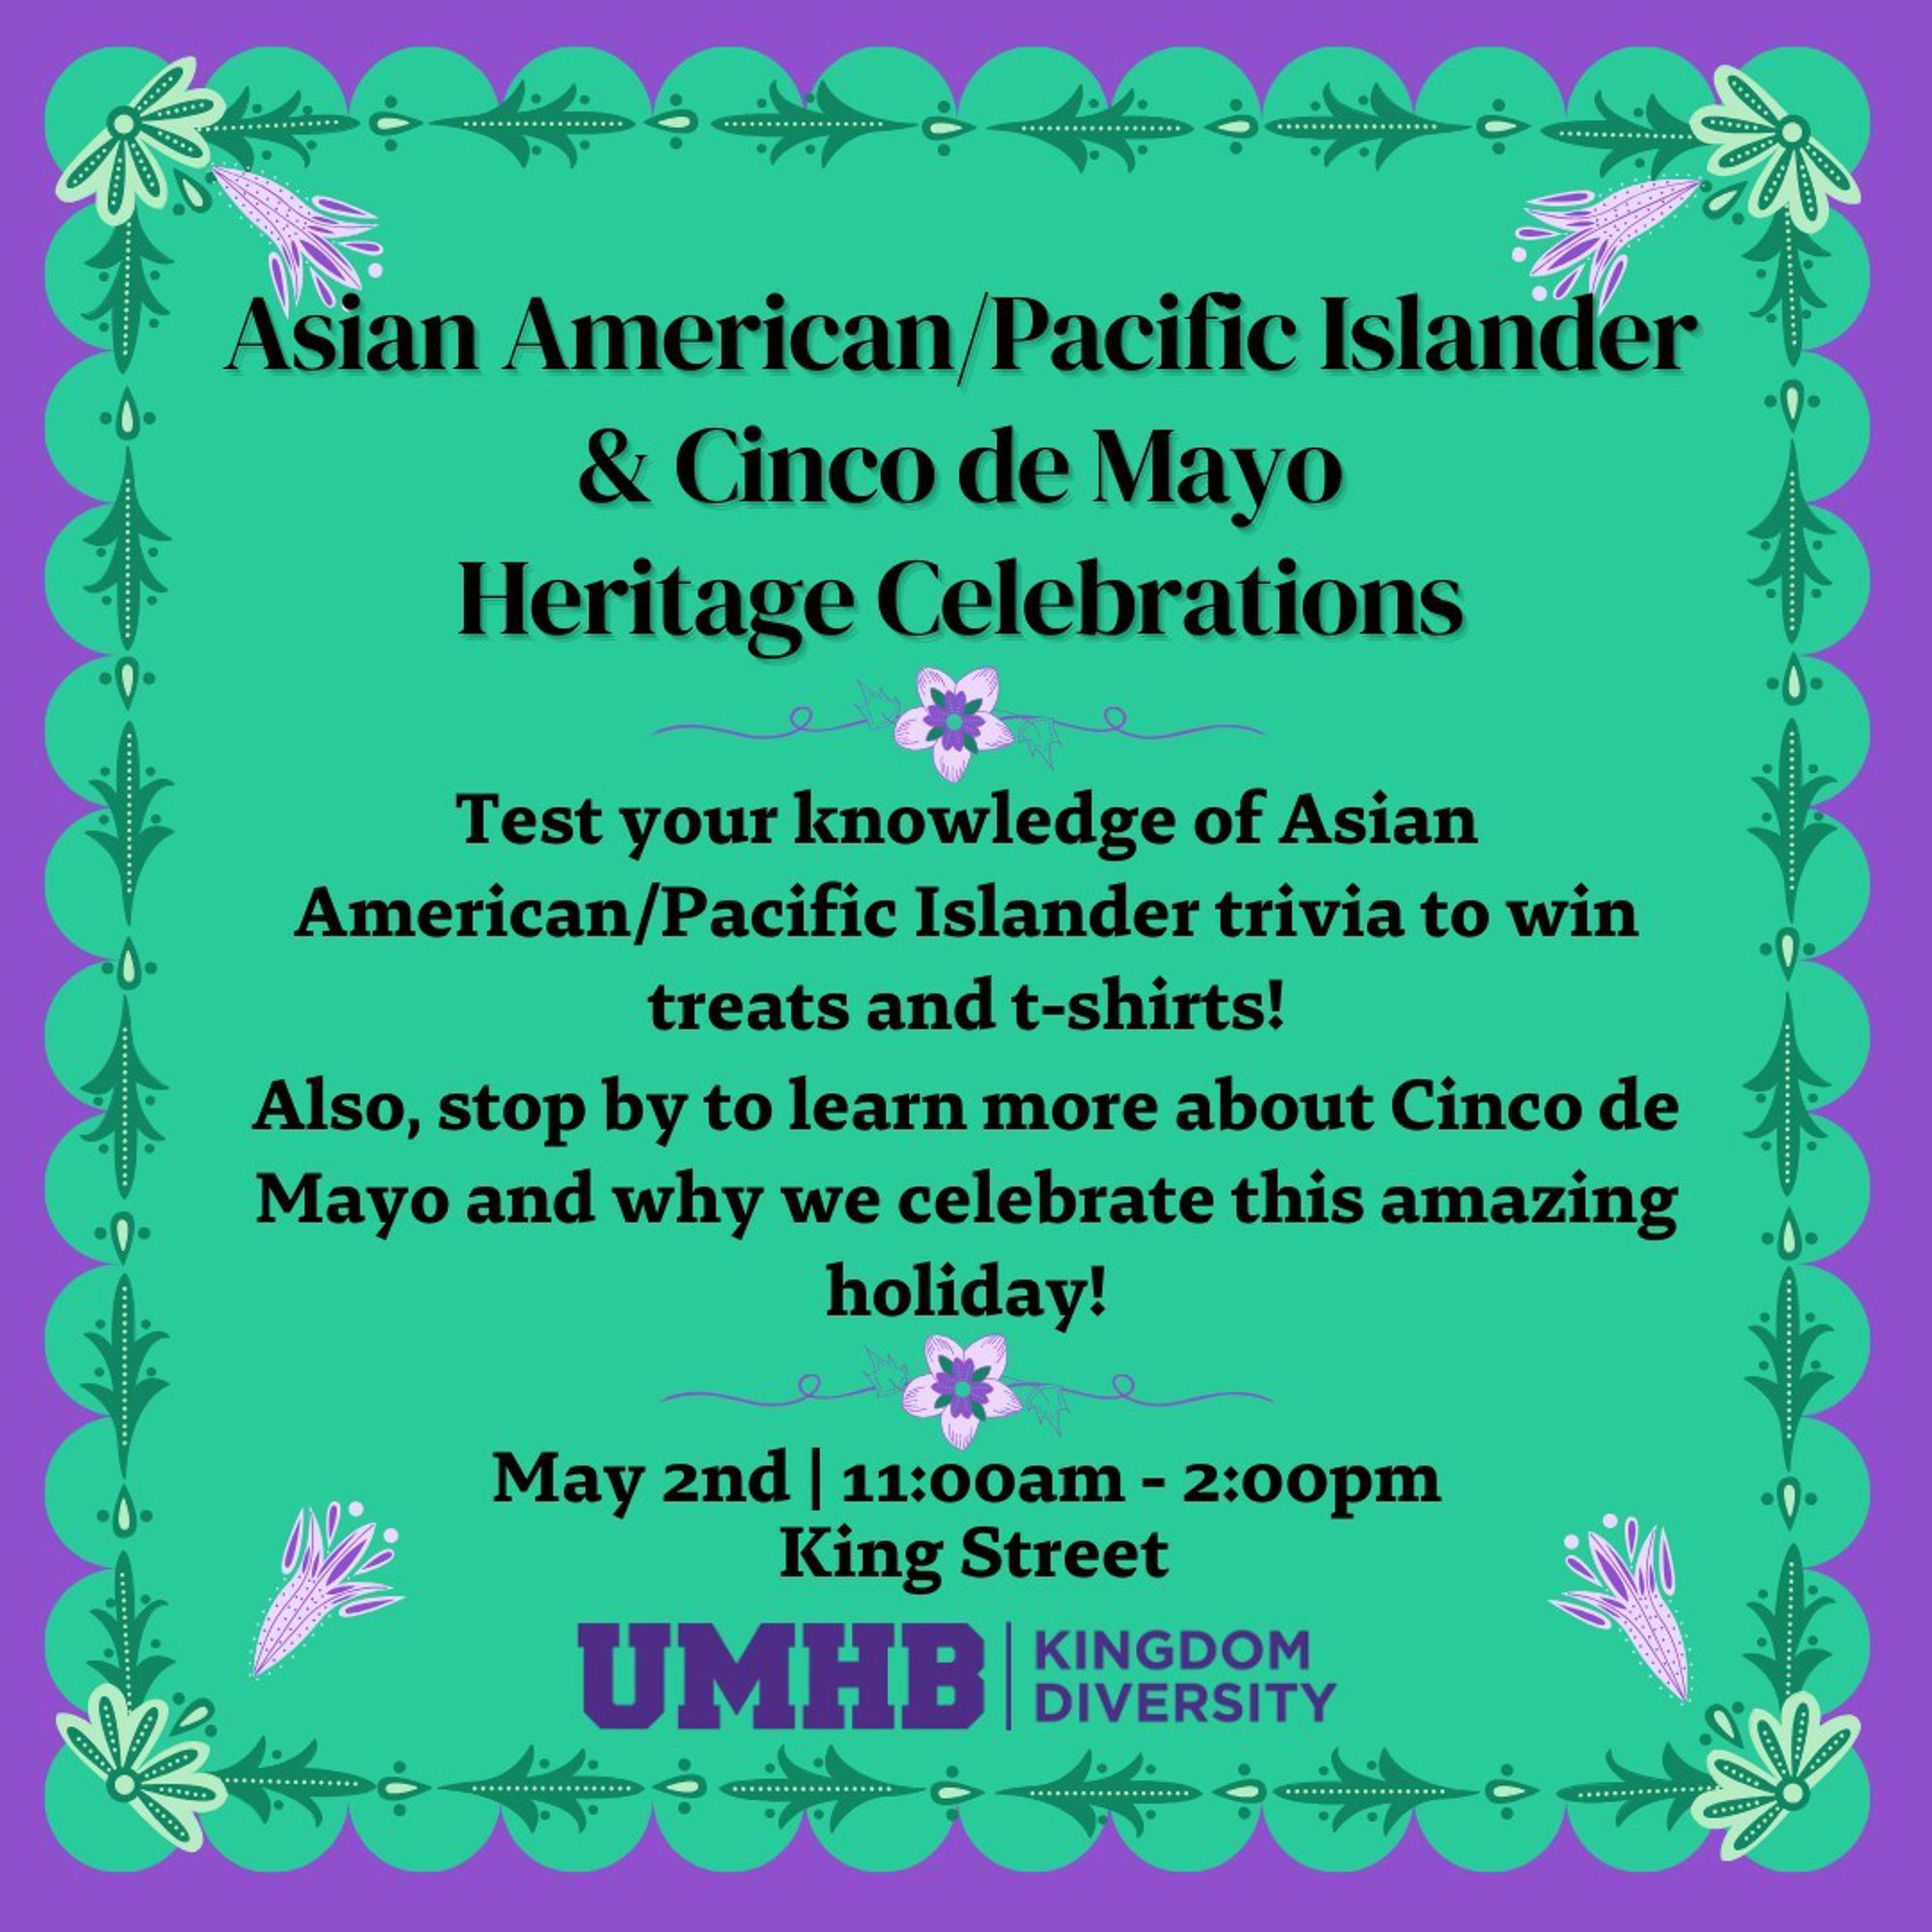 AAPI and Cinco de Mayo Celebration poster with information about Pop-Up Event